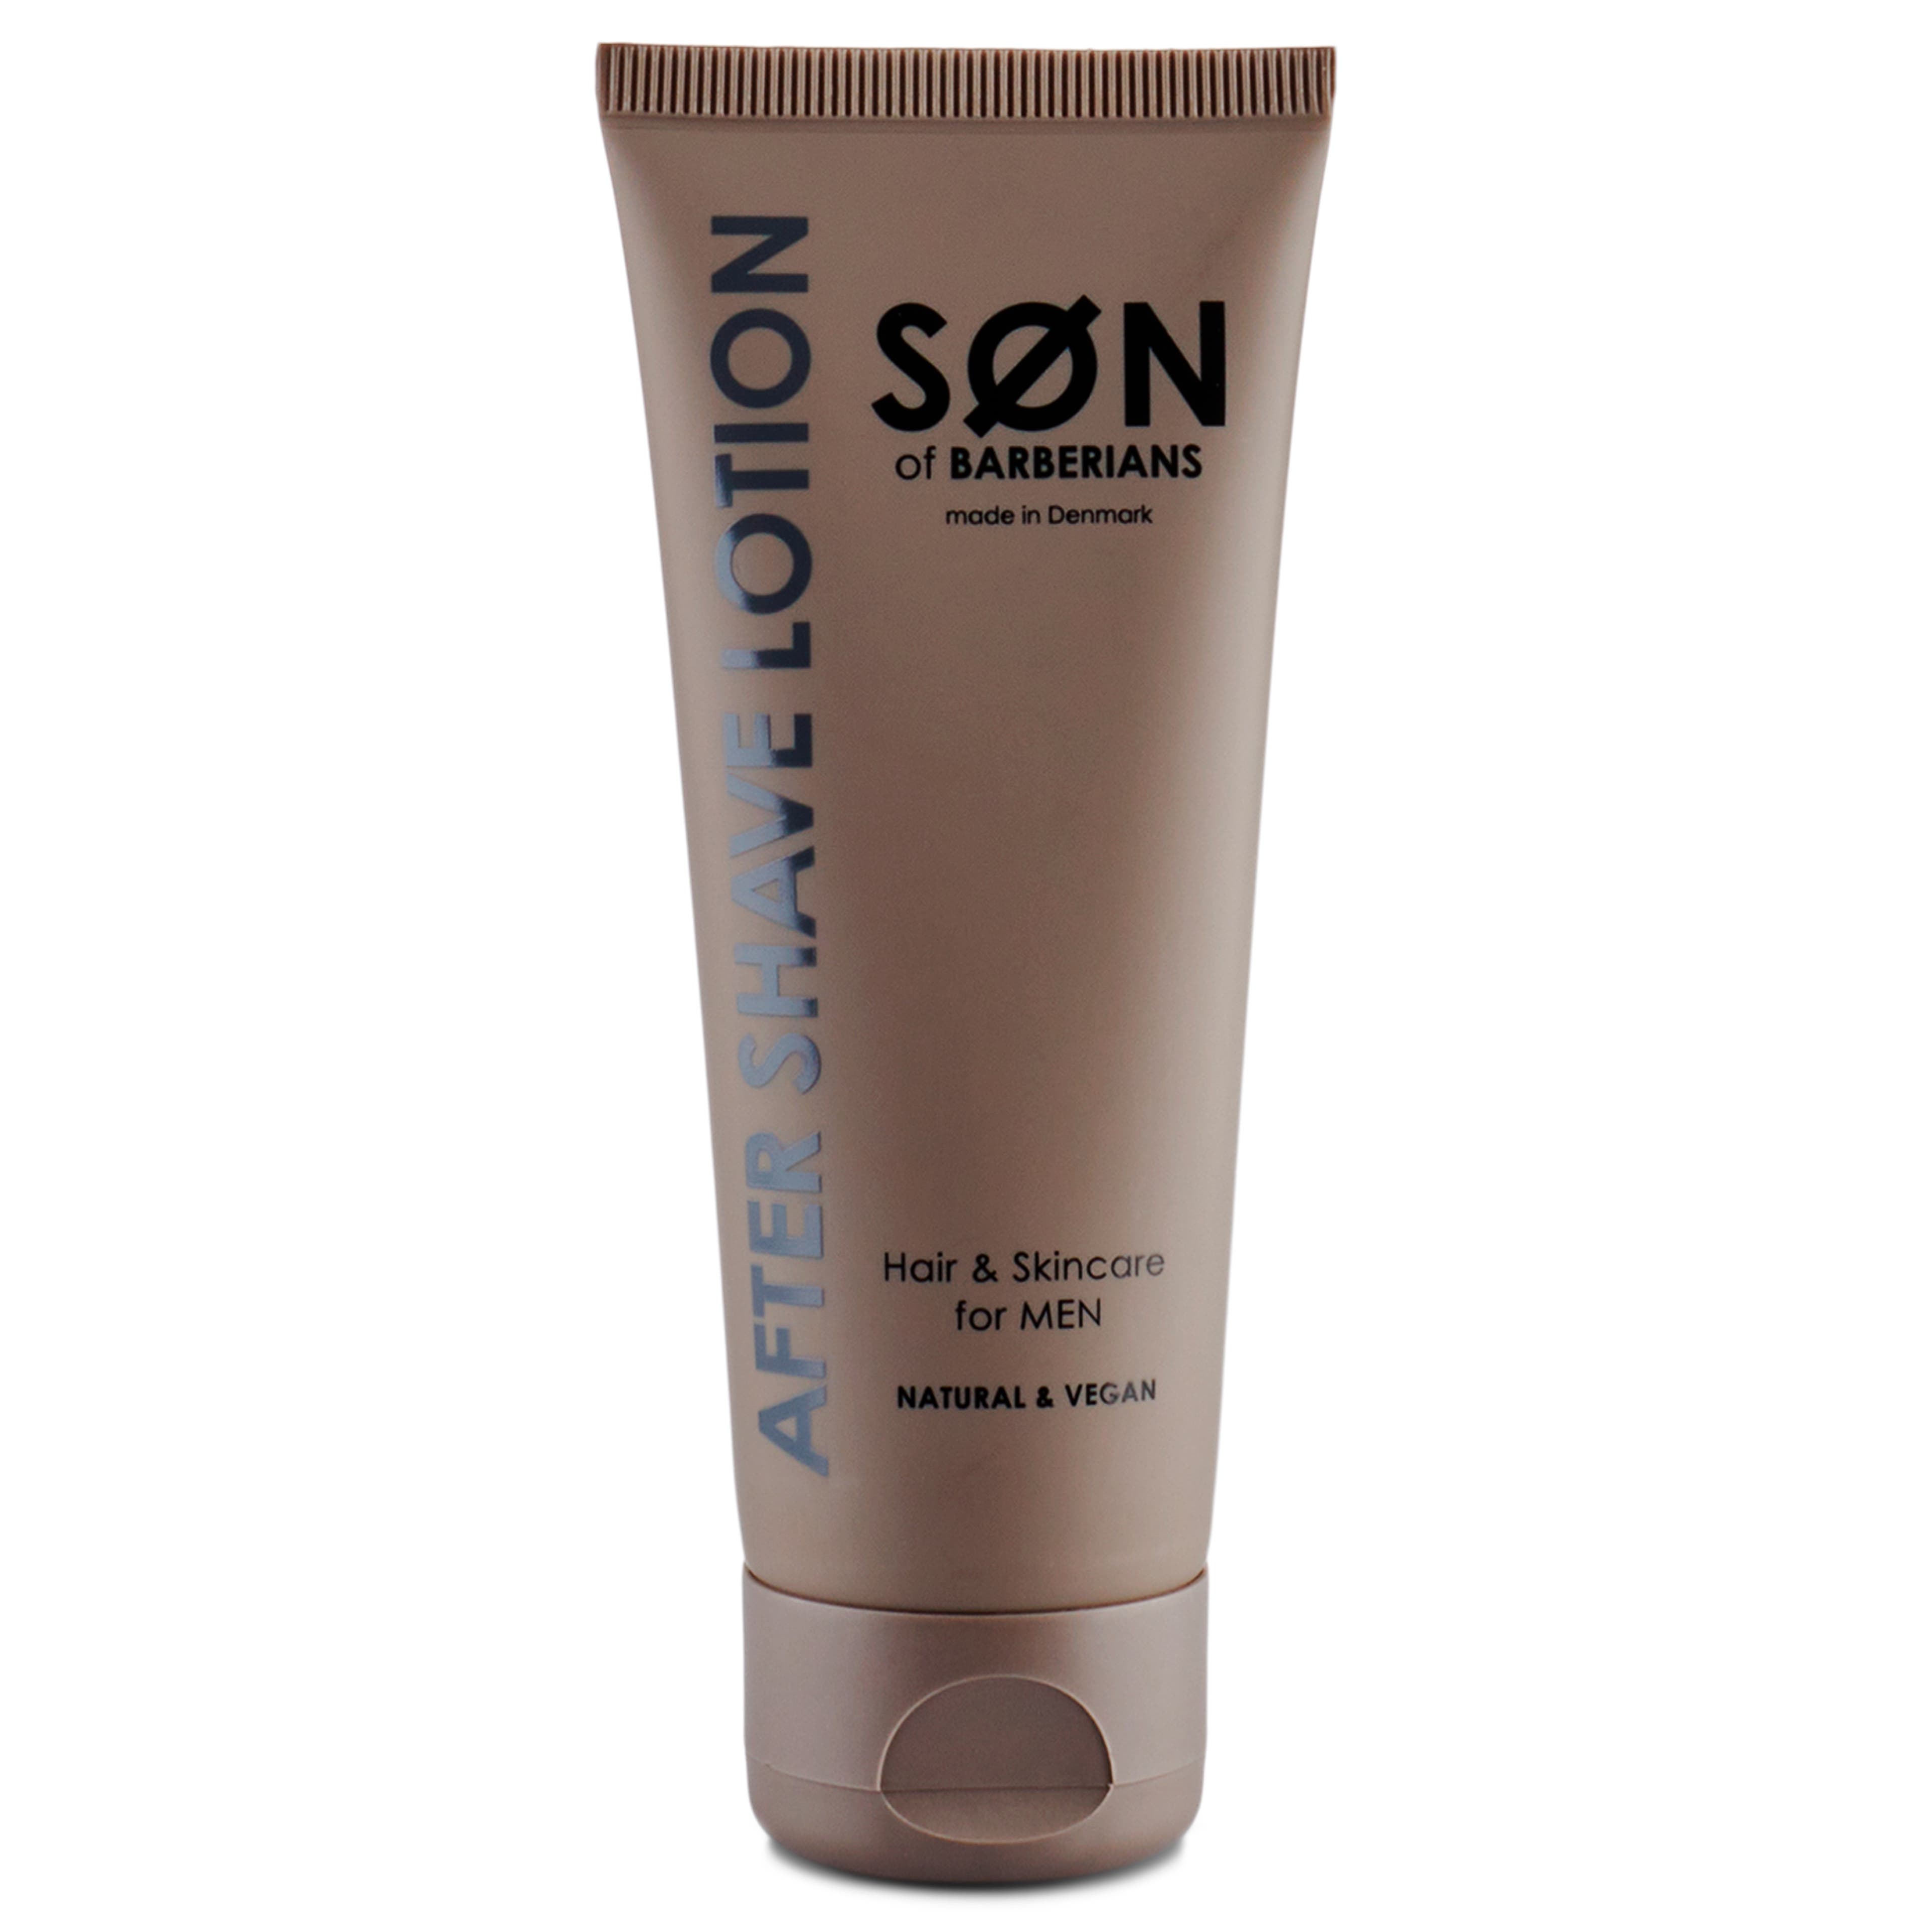 Søn of Barberians - After Shave Lotion